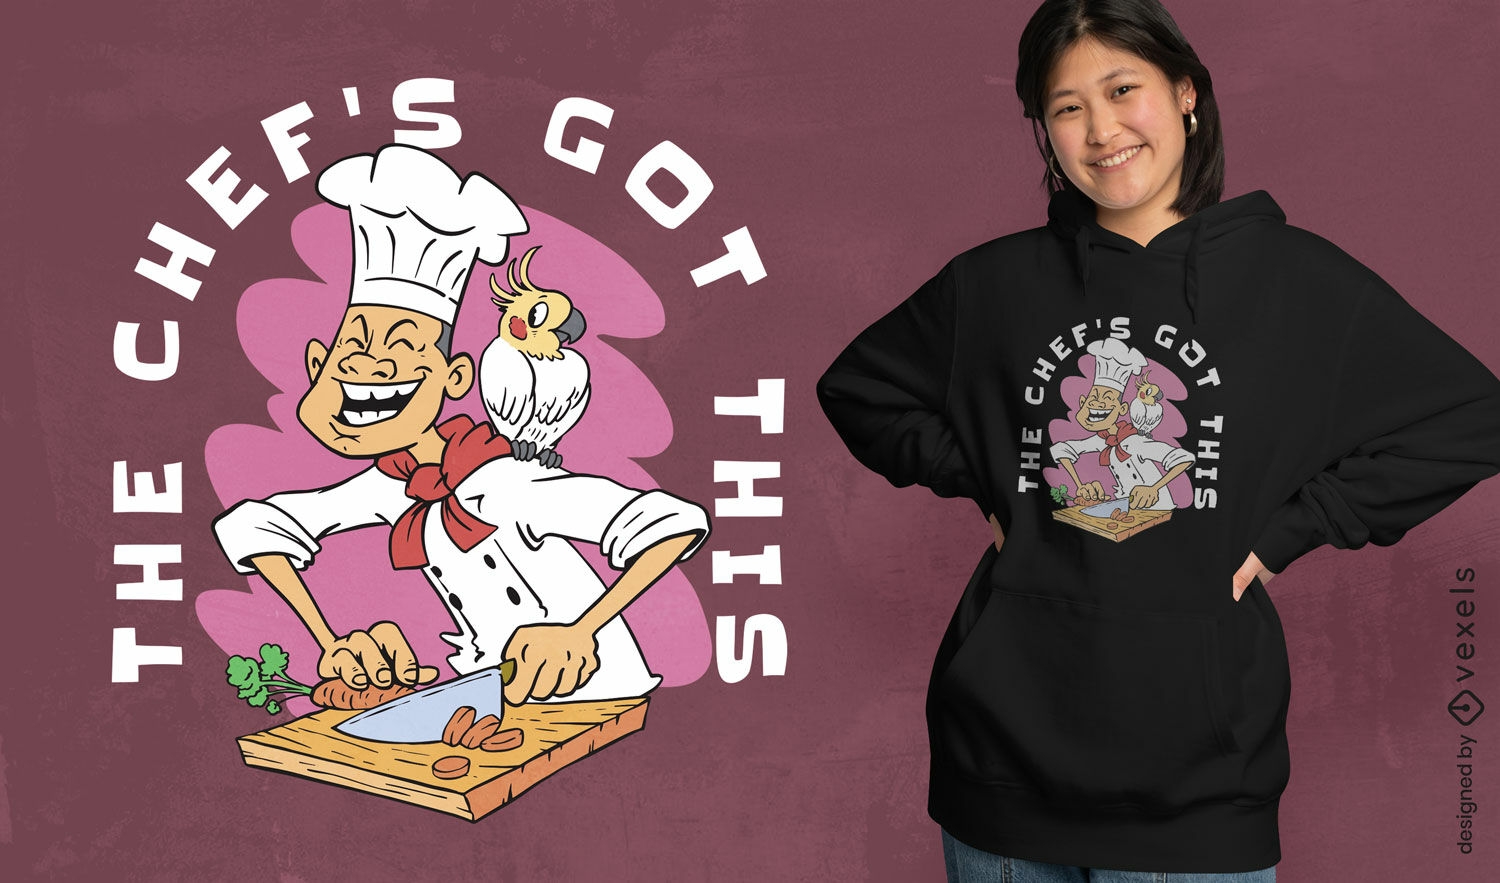 Chef cooking and laughing t-shirt design